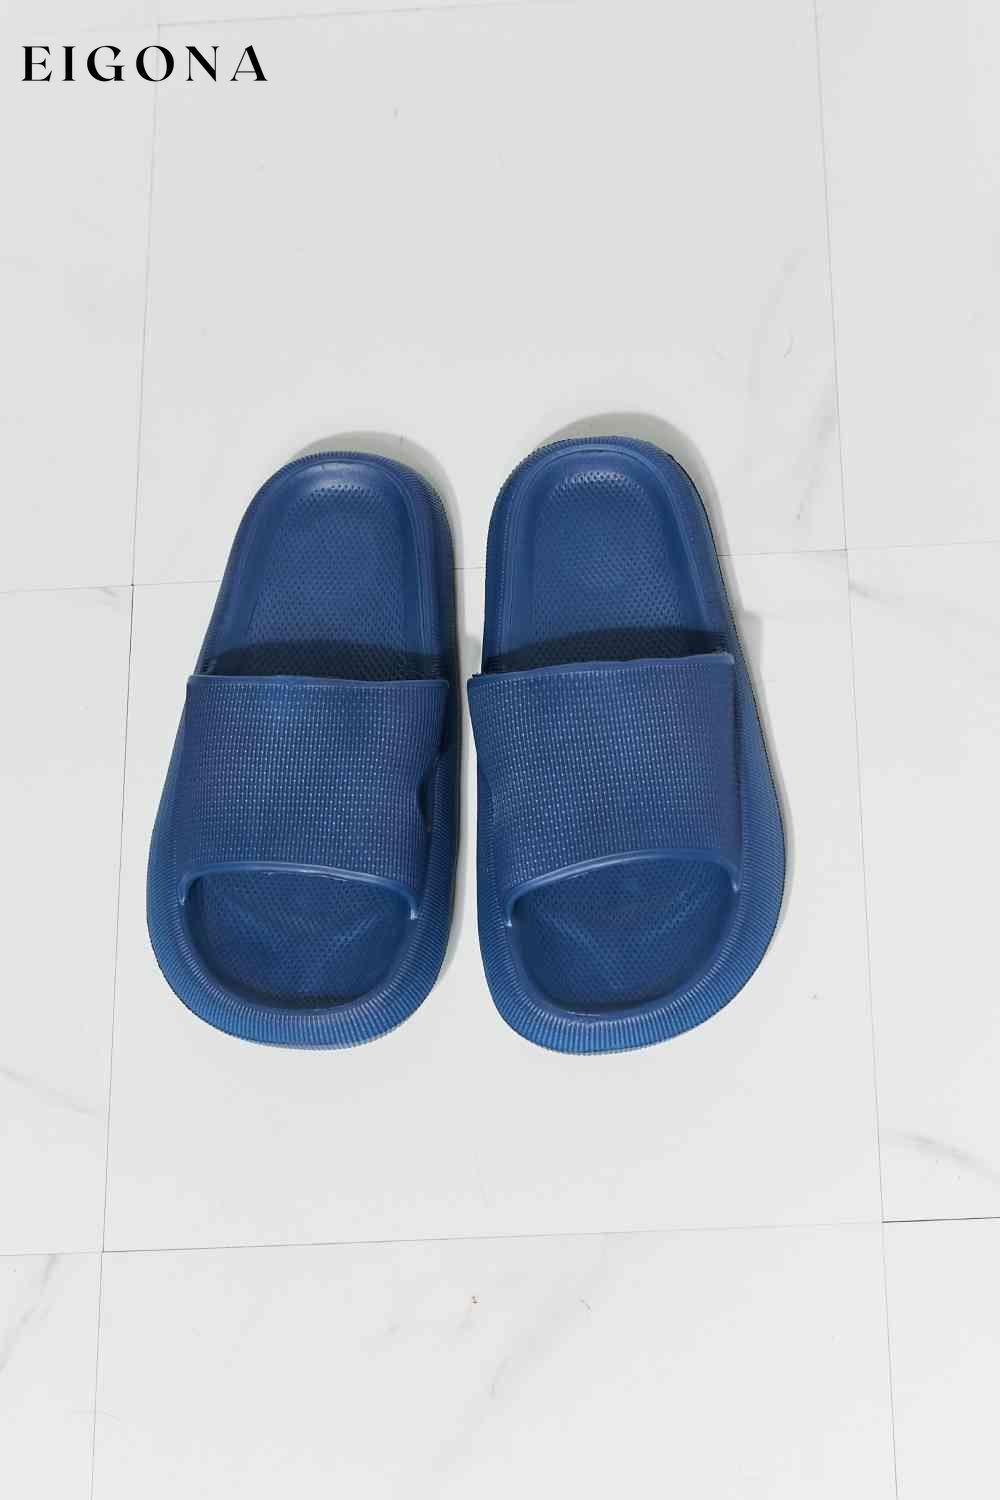 Arms Around Me Open Toe Slide in Navy Melody Ship from USA shoes womens shoes